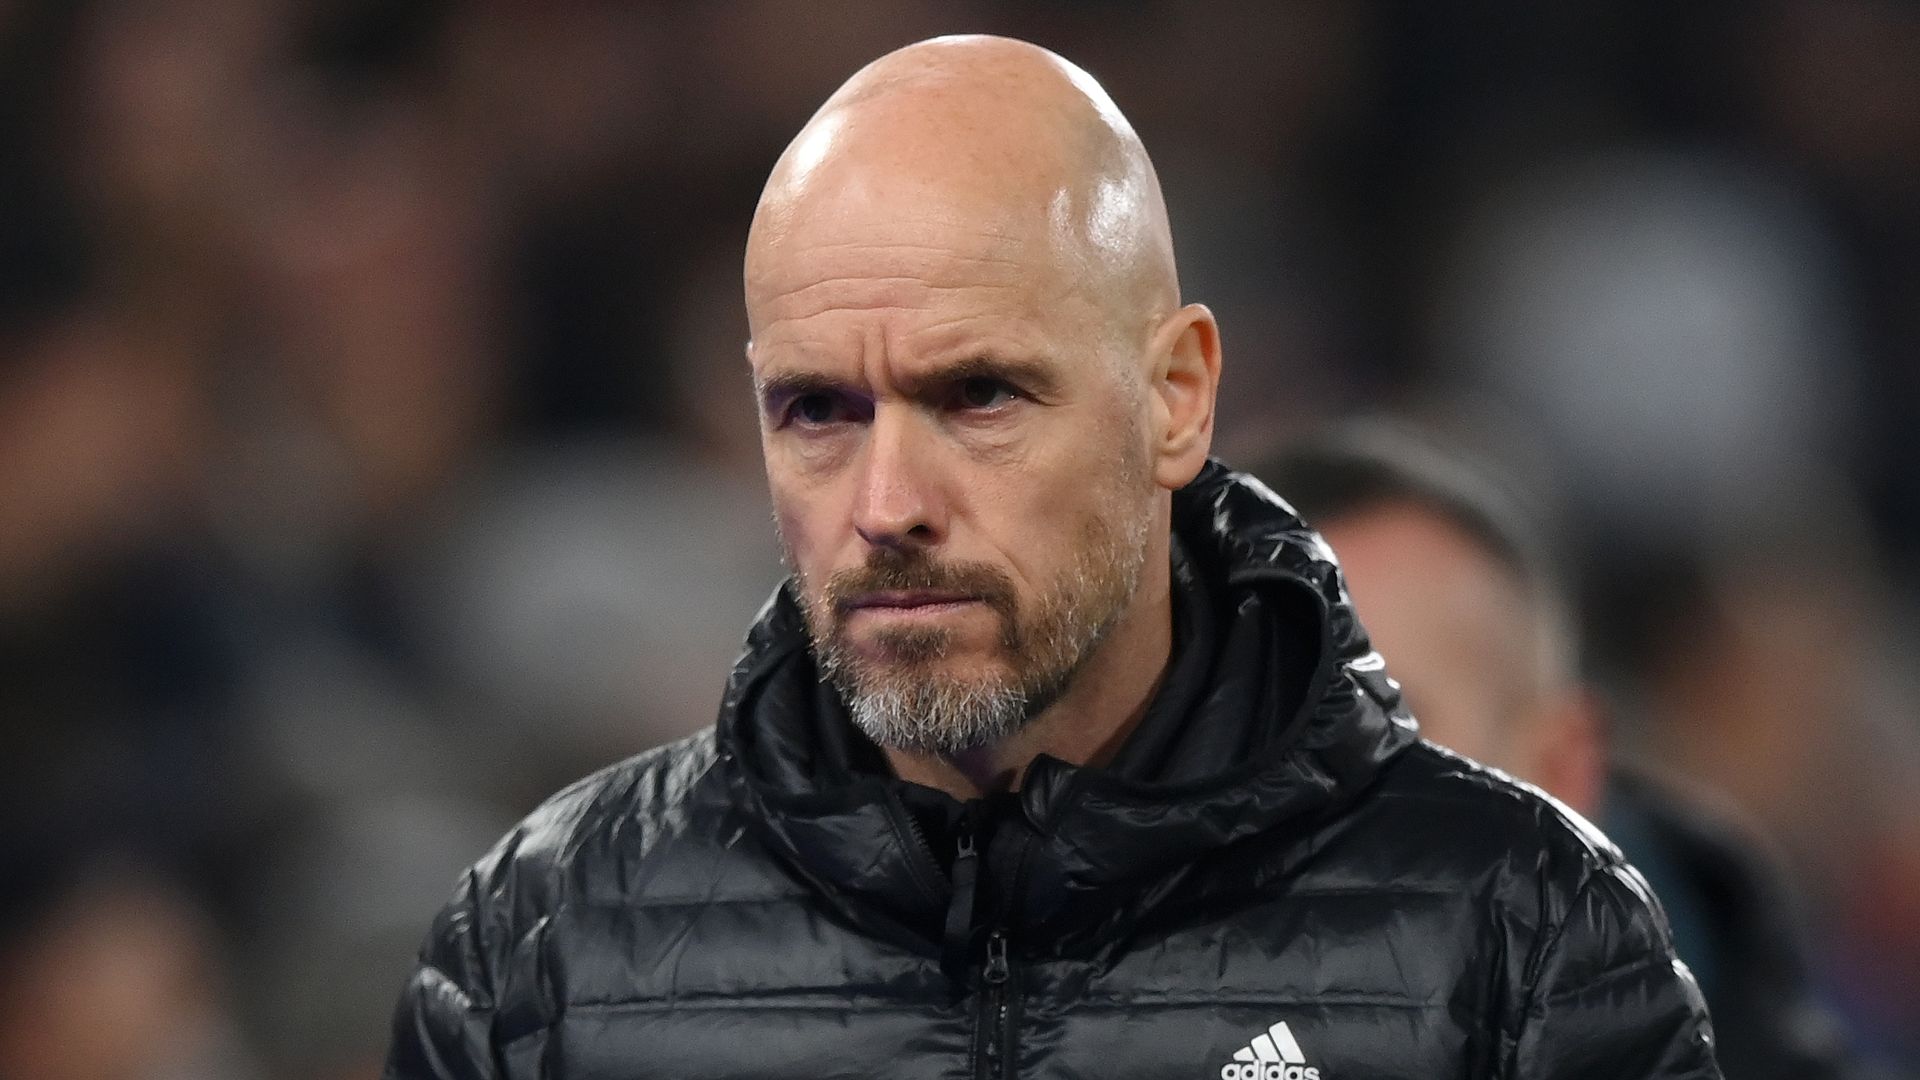 Ten Hag on sack fears: I'm not concerned, owners have common sense